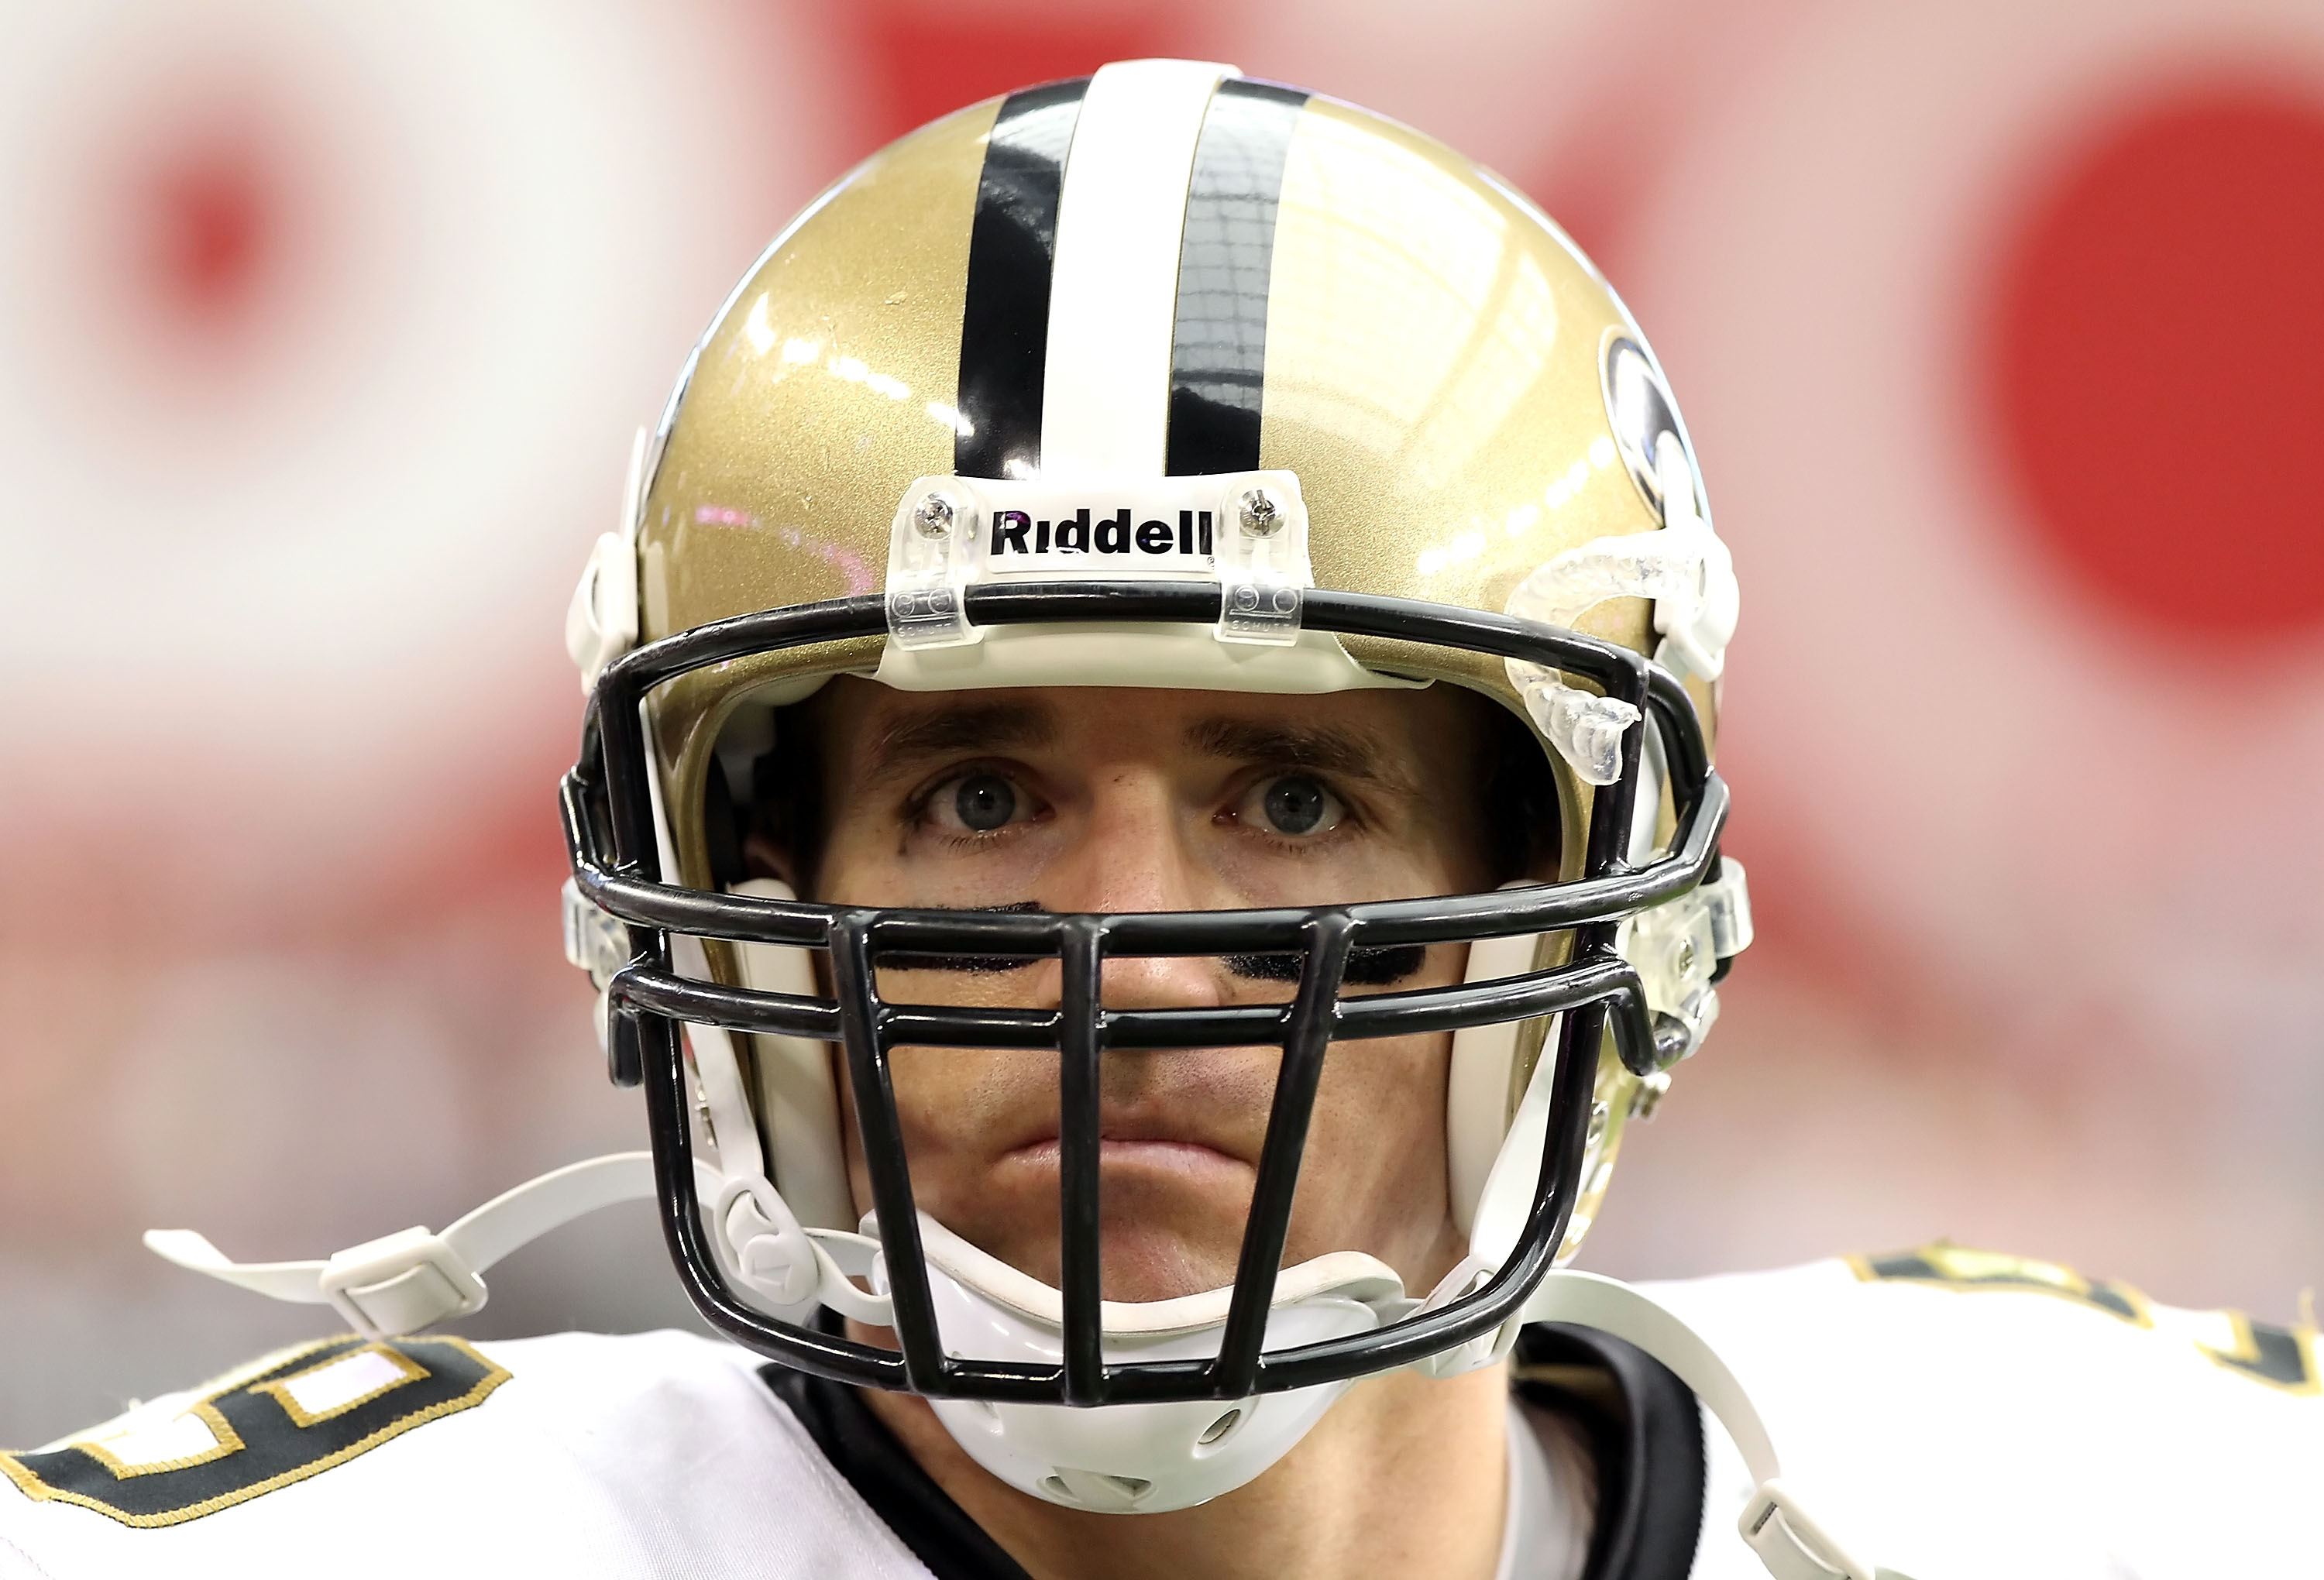 Drew Brees overtakes Tom Brady for career touchdown lead